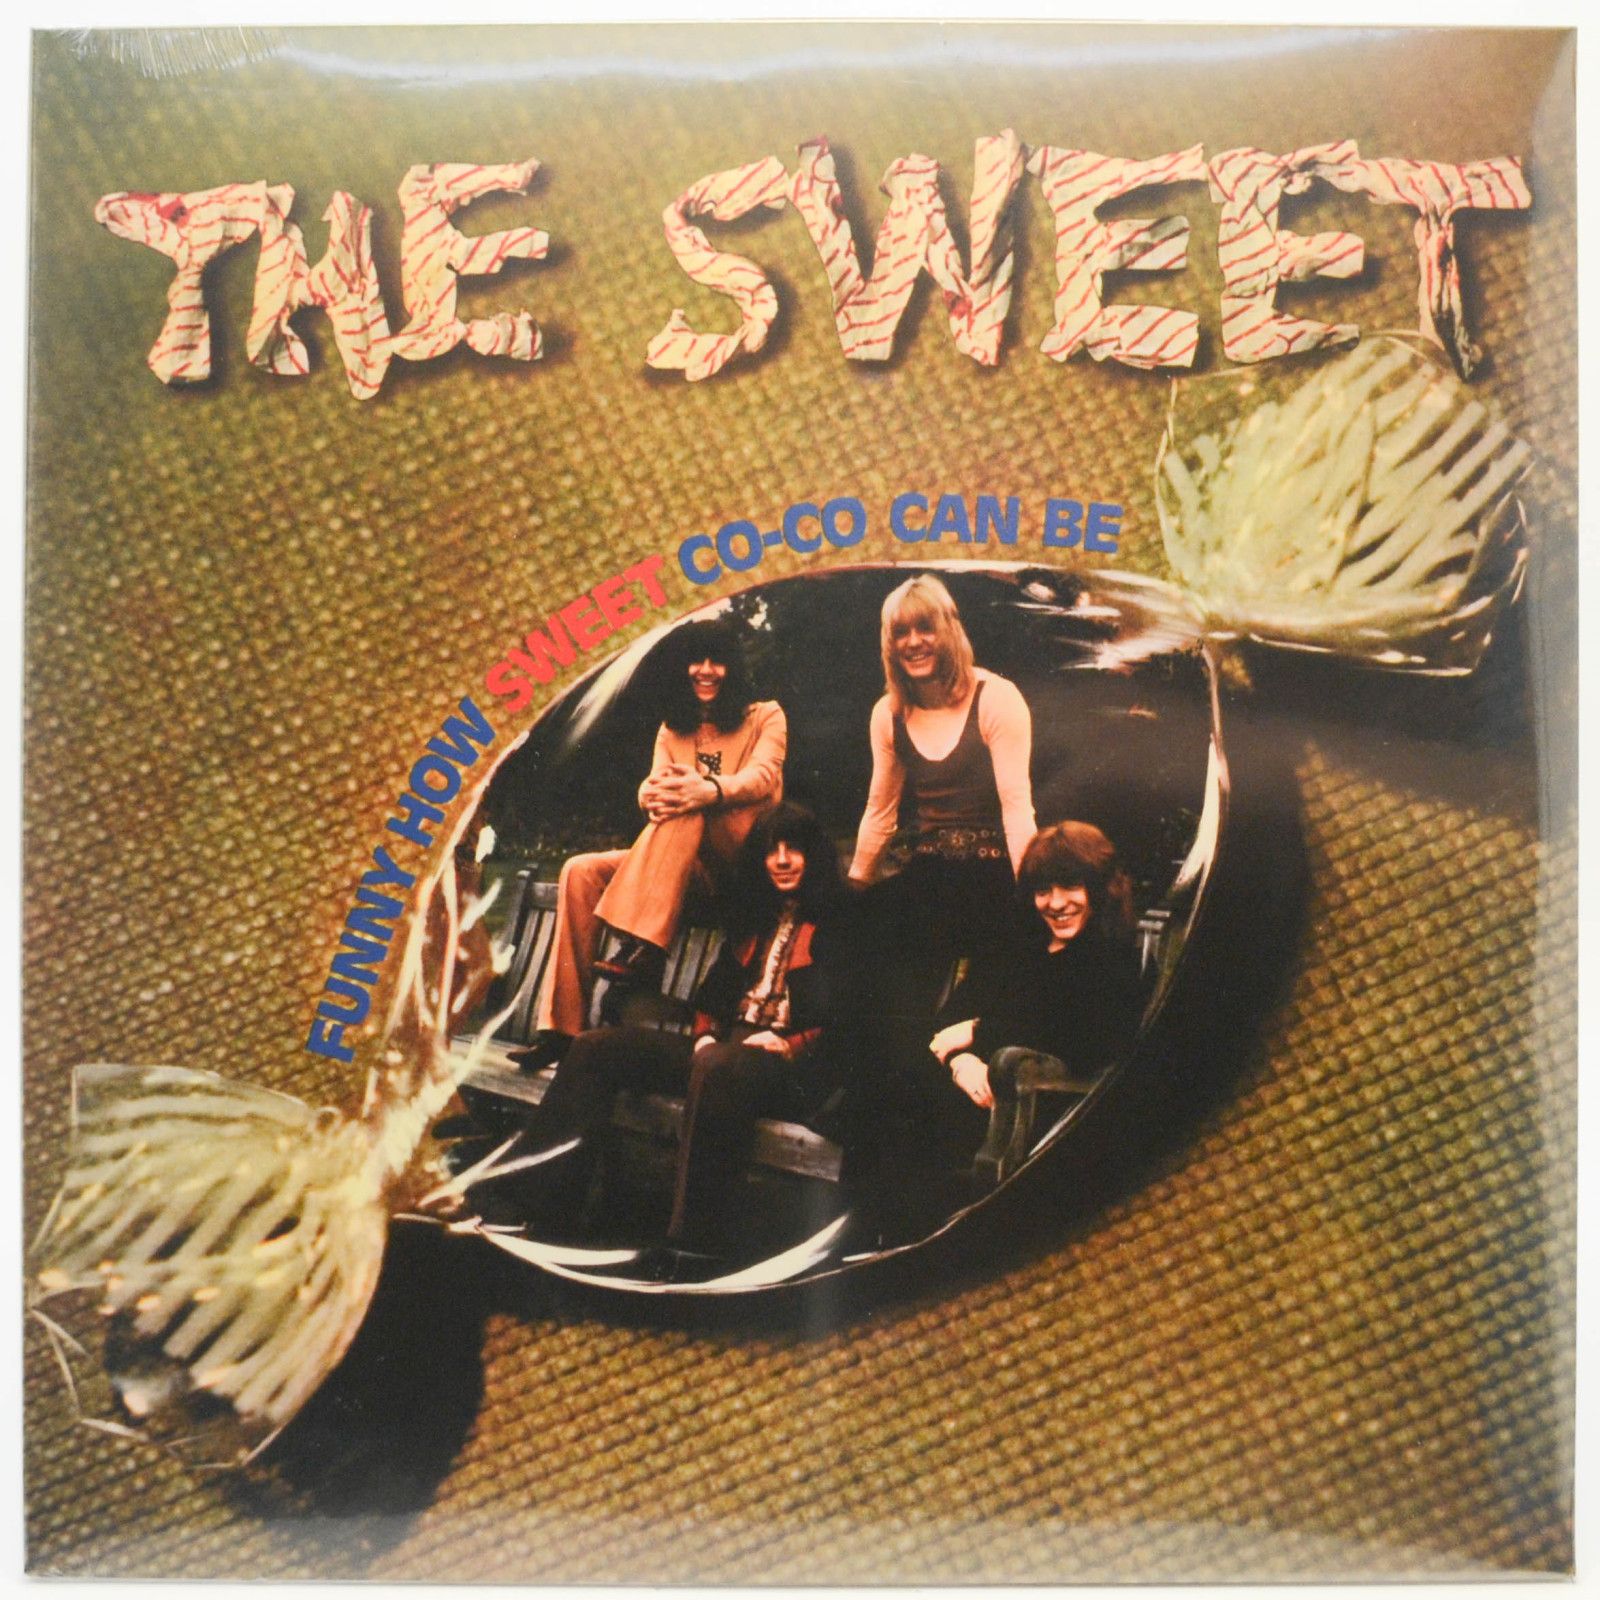 Sweet — Funny How Sweet Co-Co Can Be, 1971